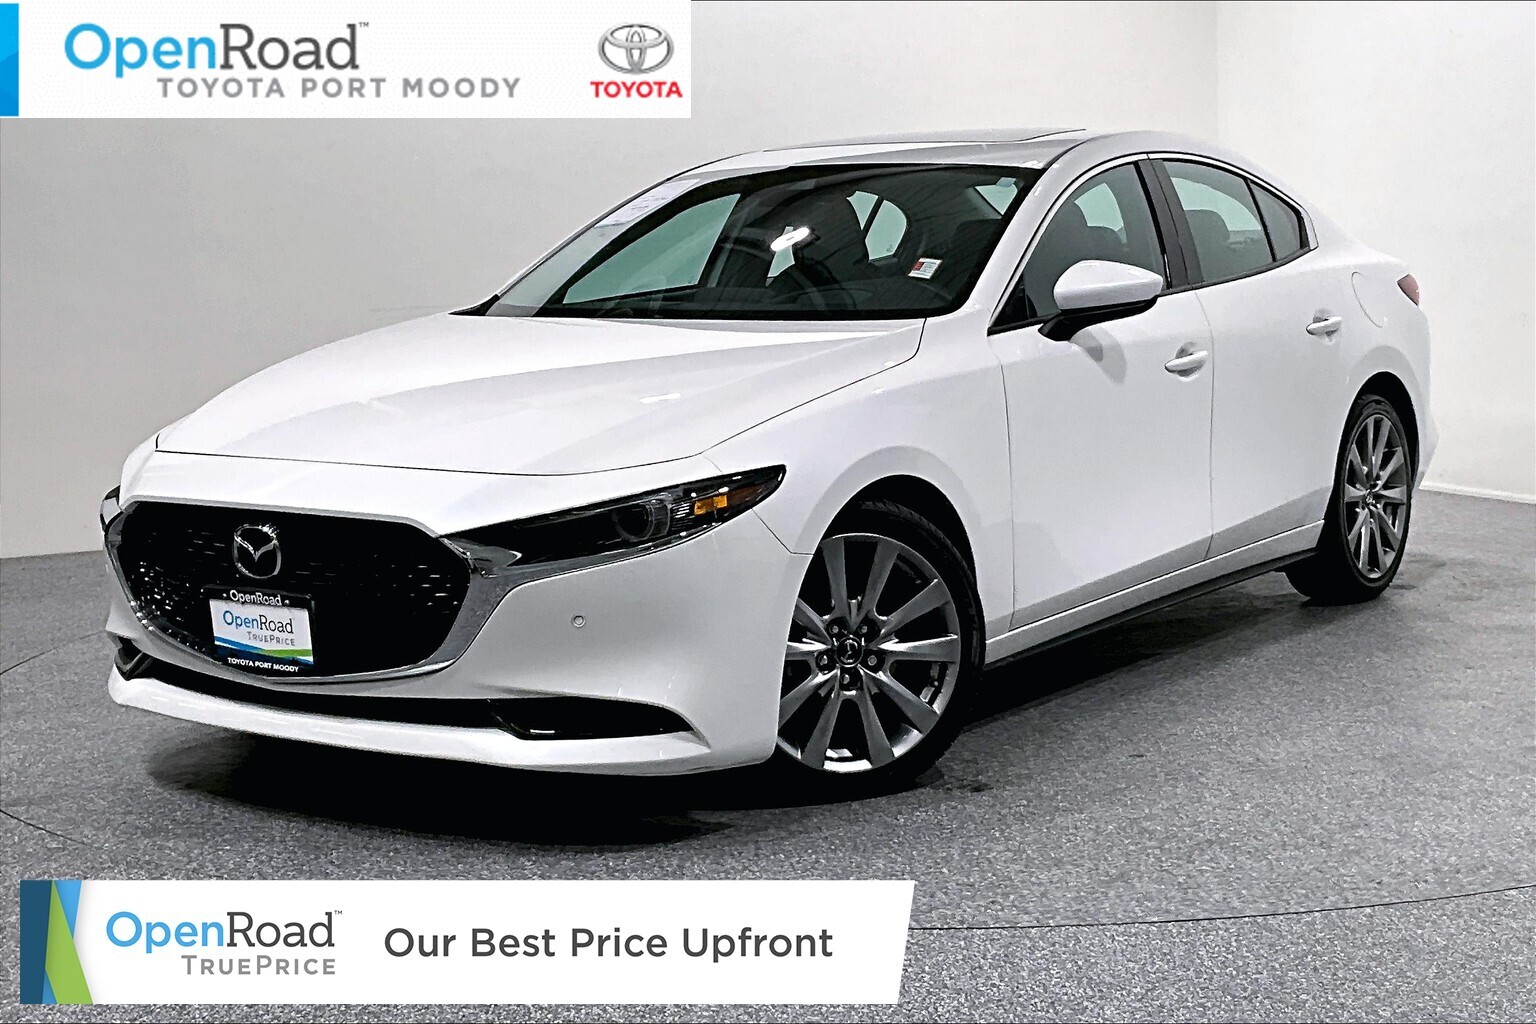 2021 Mazda Mazda3 GT at AWD |OpenRoad True Price |Local |One Owner |